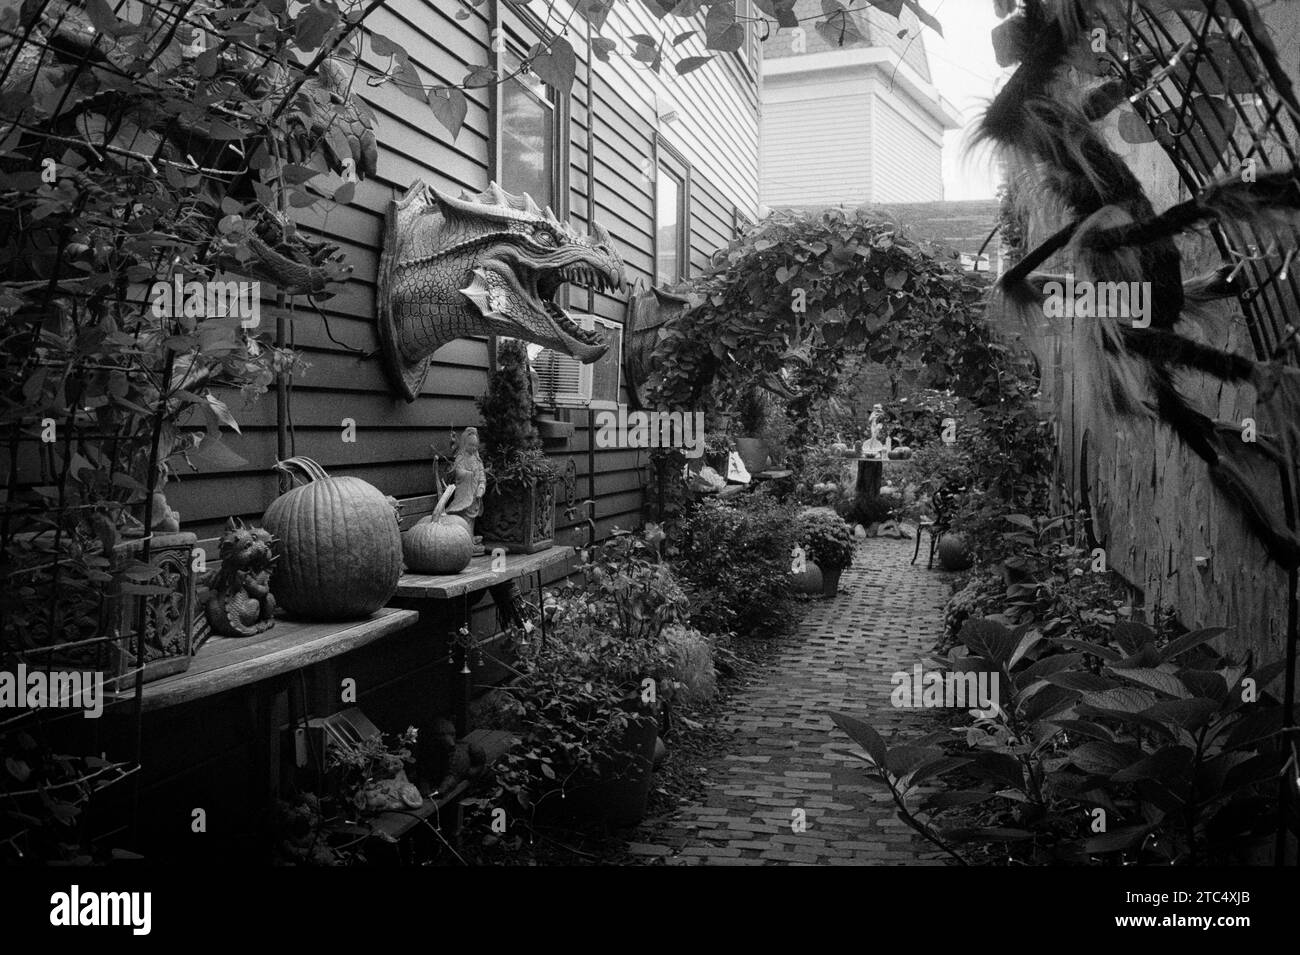 Salem, Massachusetts - An alleyway behind a restaurant in Salem is decorated with a dragons head, pumpkins, and a giant spider for Halloween calibrati Stock Photo